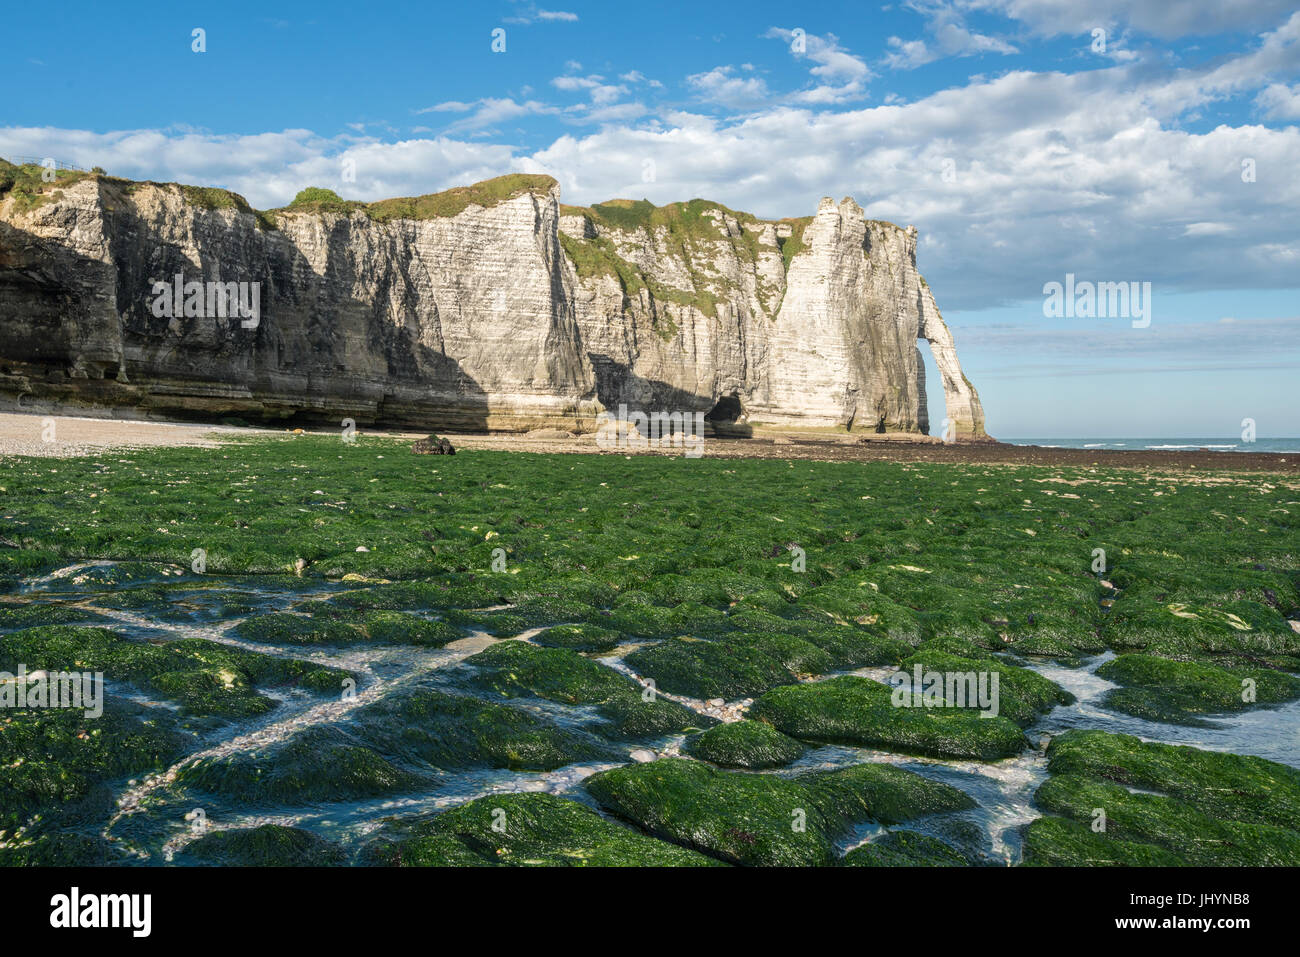 Porte d'Aval with low tide and seaweed on the beach, Etretat, Normandy, France, Europe Stock Photo